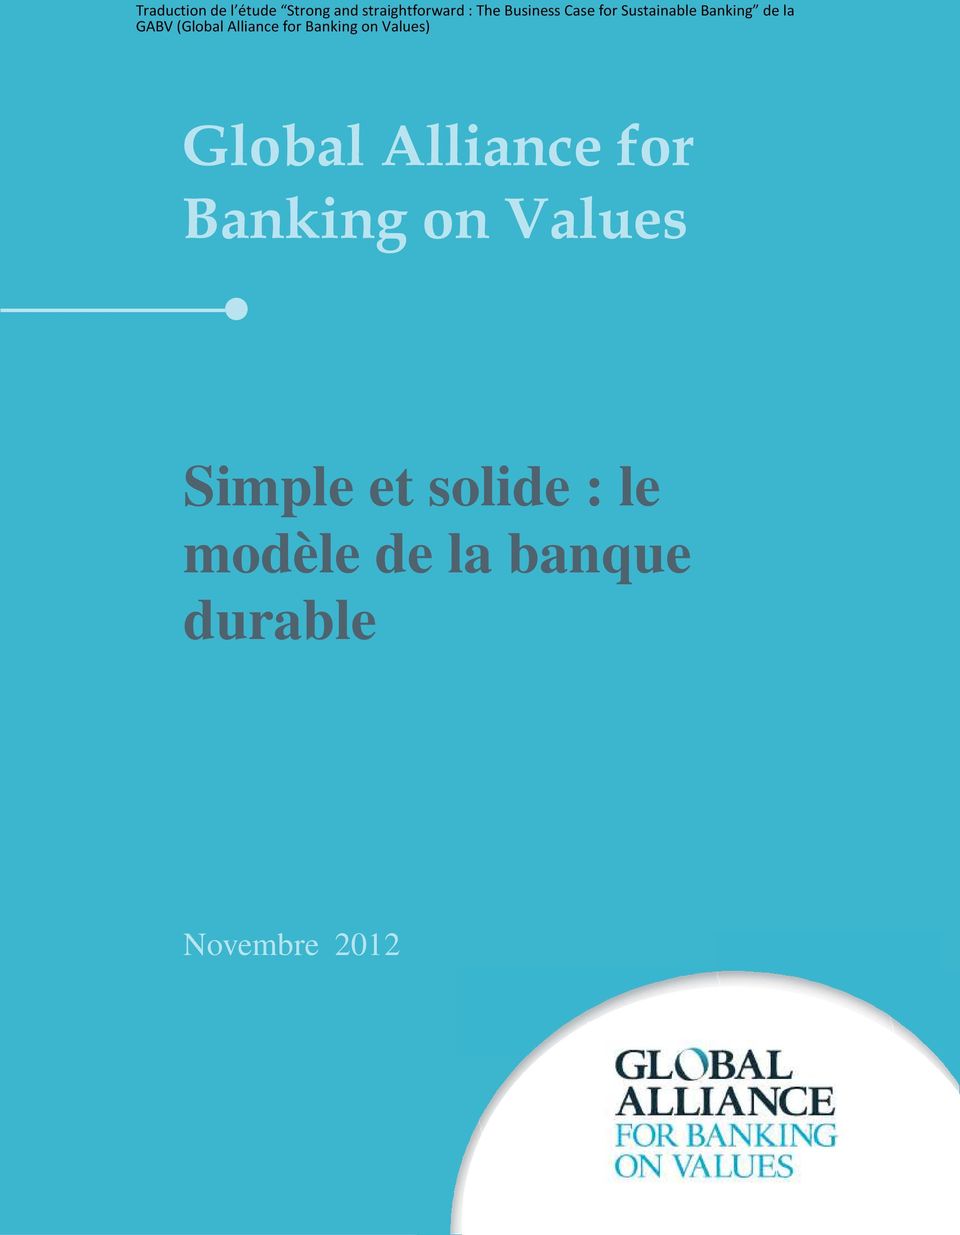 Alliance for Banking on Values) Global Alliance for Banking